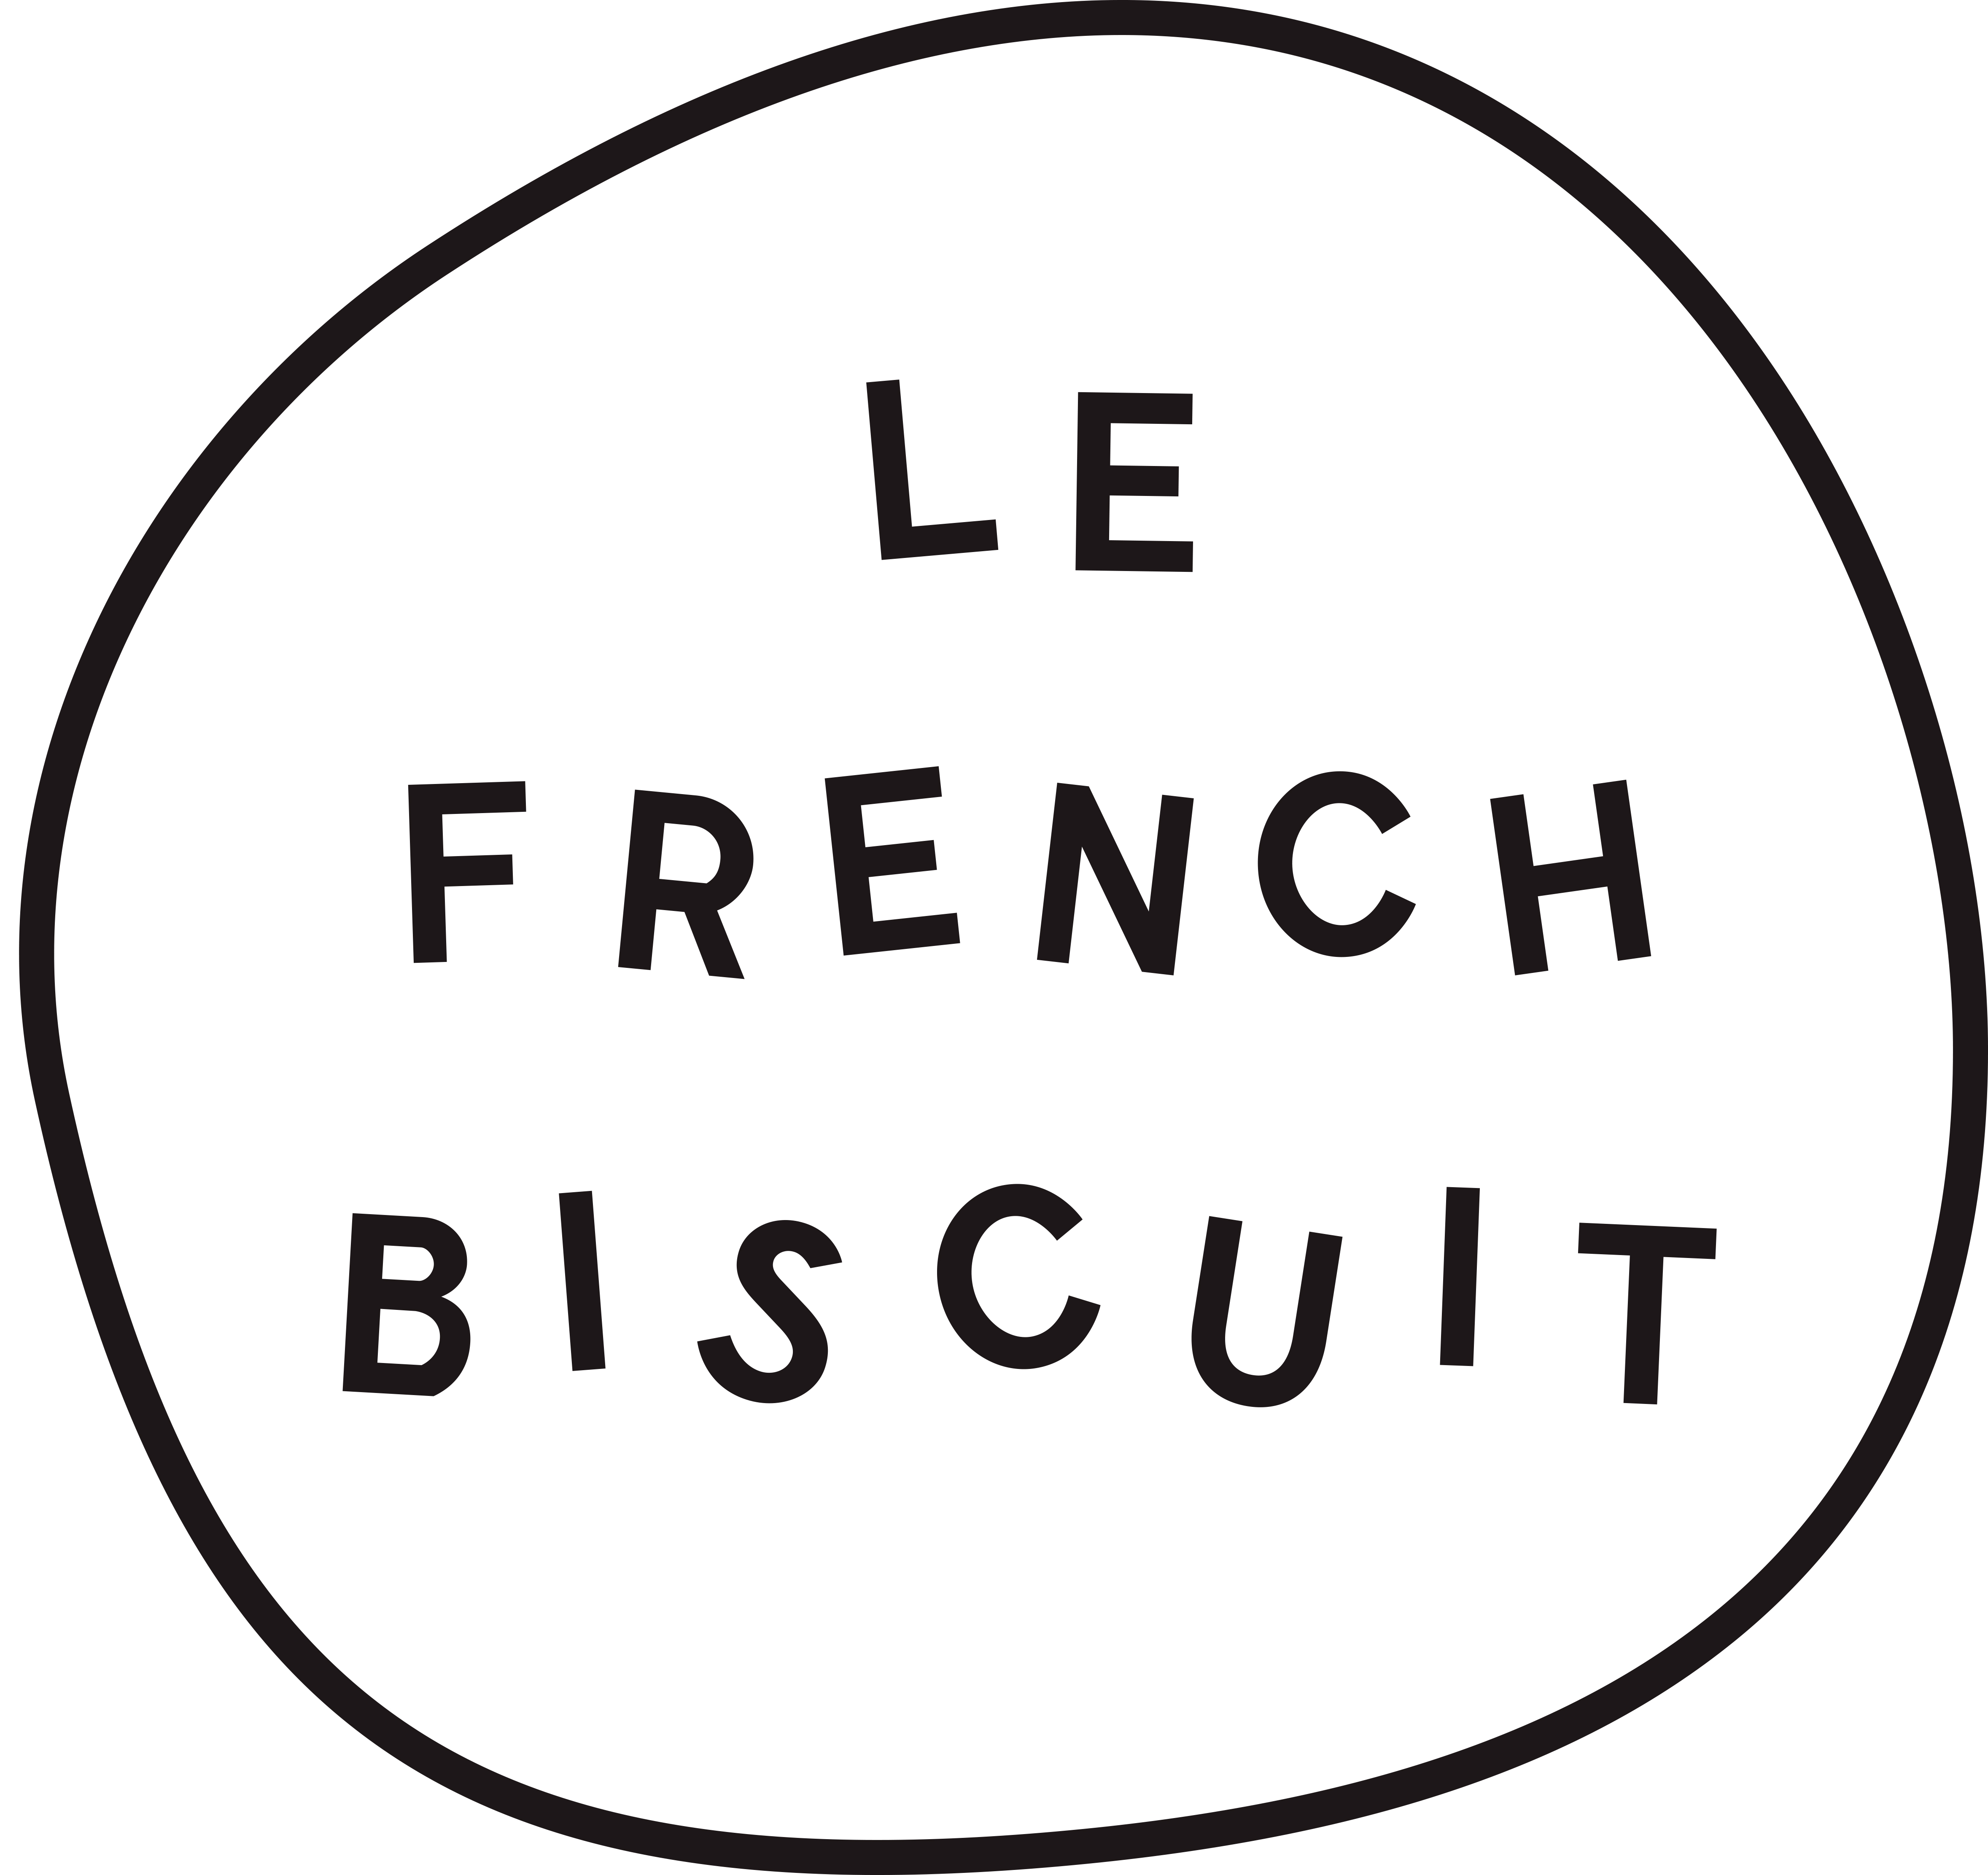 FrenchBiscuit